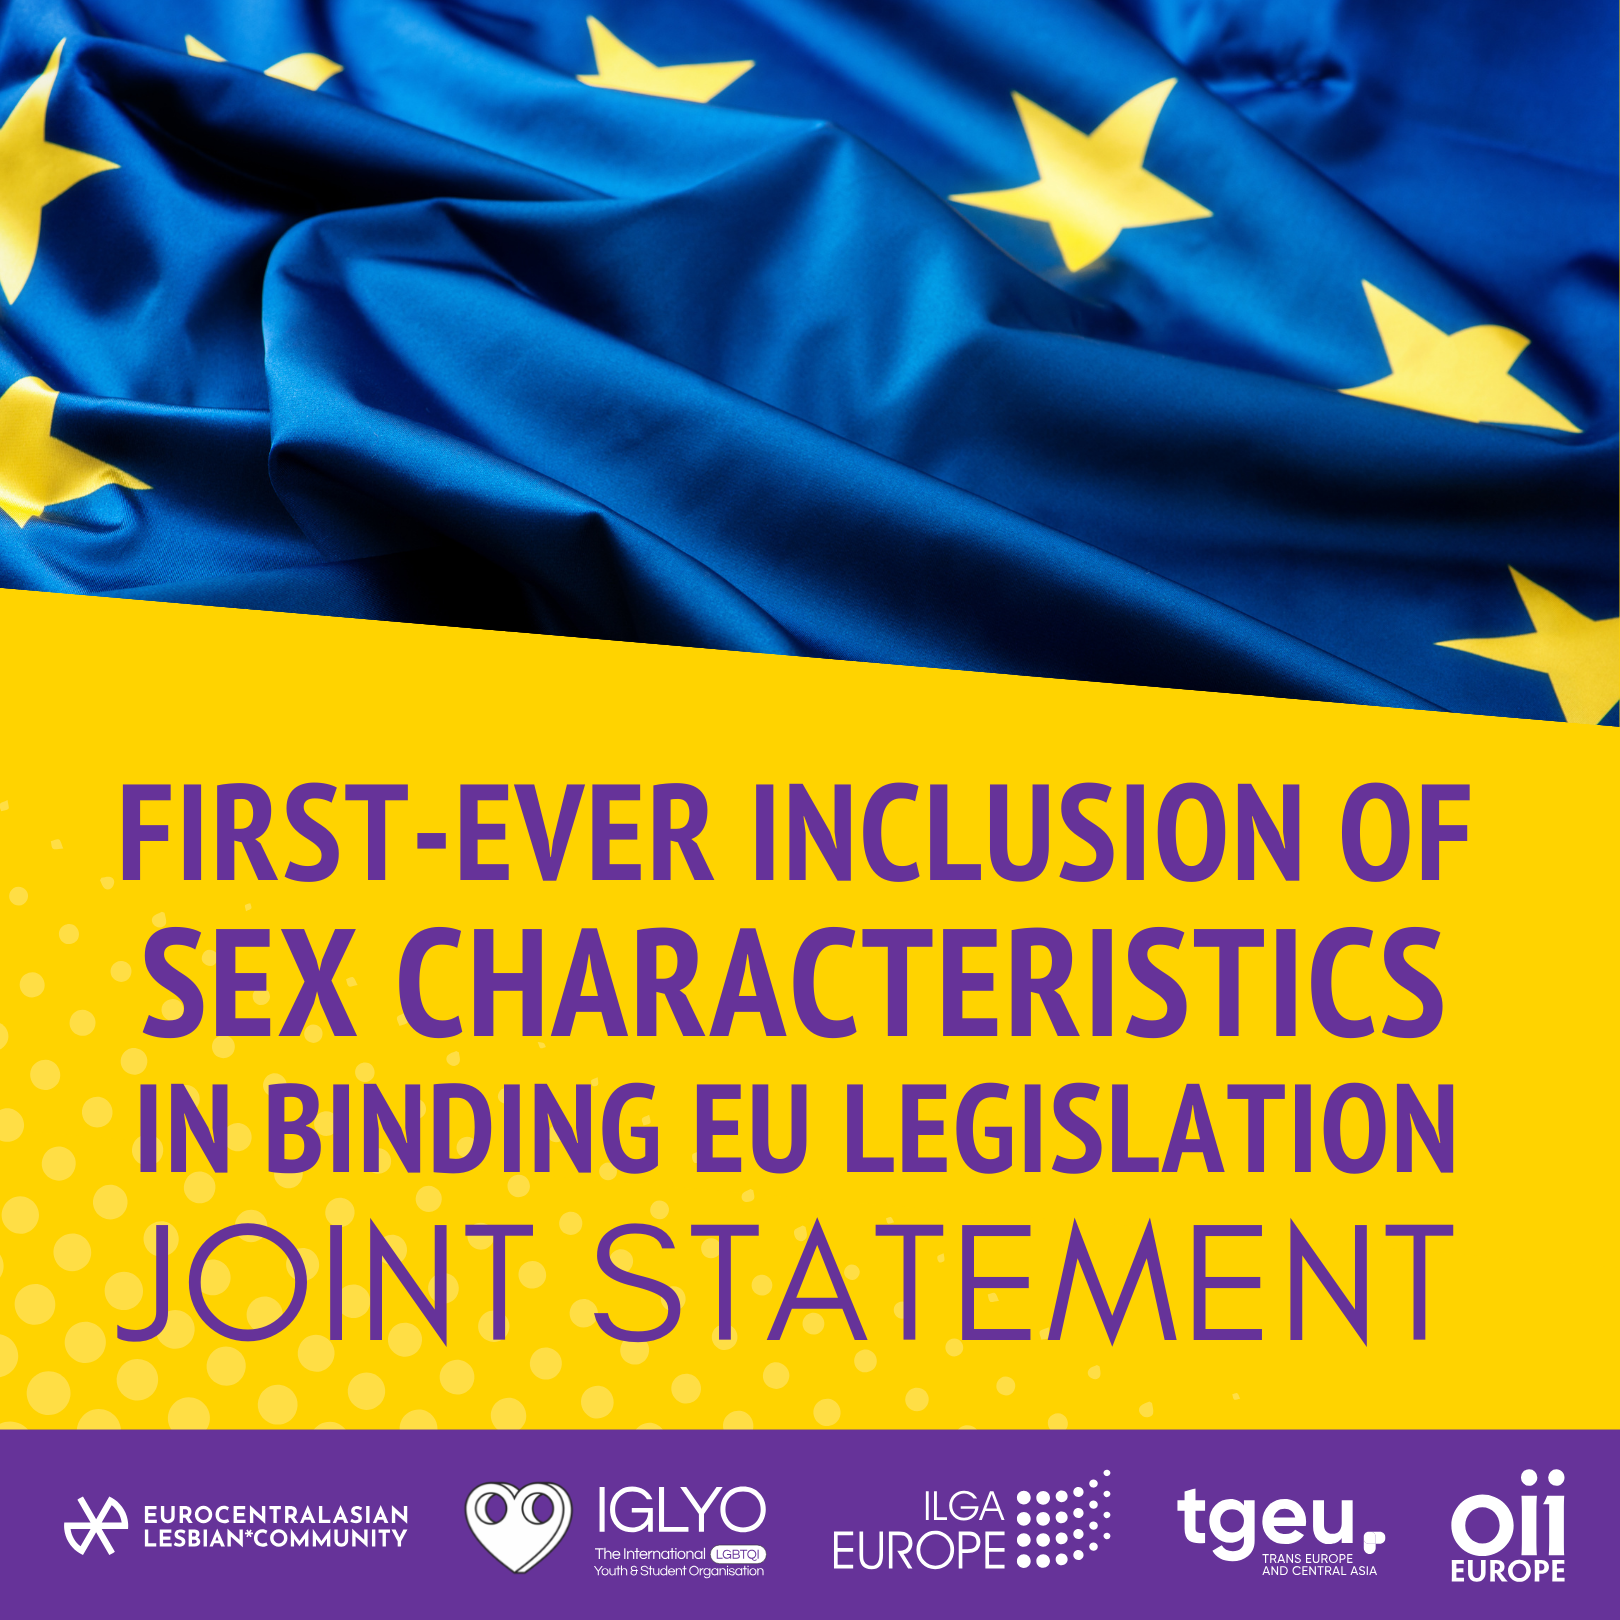 Joint Statement: Milestone for trans and intersex rights in Europe